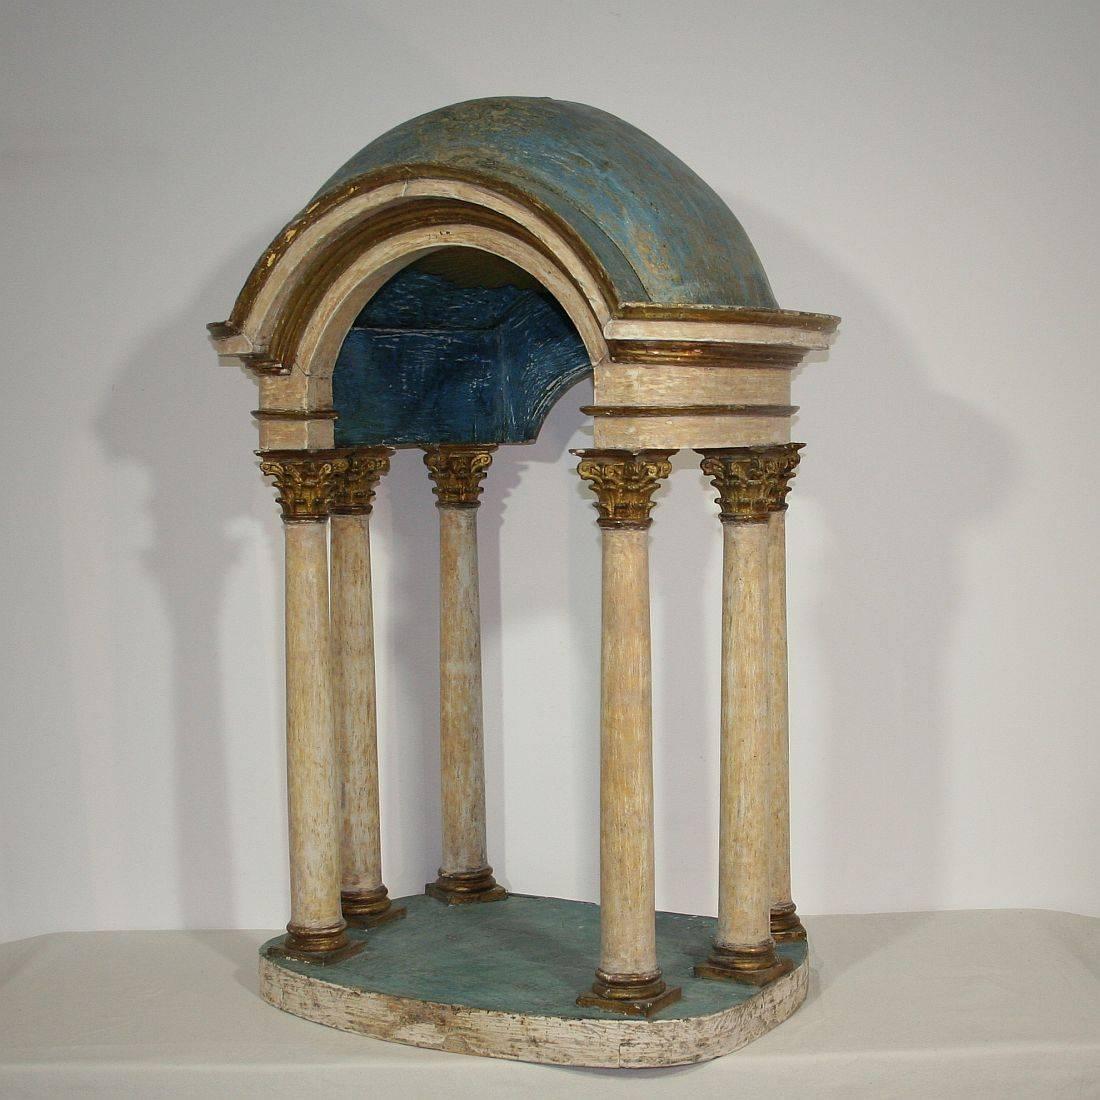 Fabulous and large Italian Baroque altar with columns and a dome. Beautiful old colors
Italy circa 1750
Weathered, small losses. More pictures of course available on request.